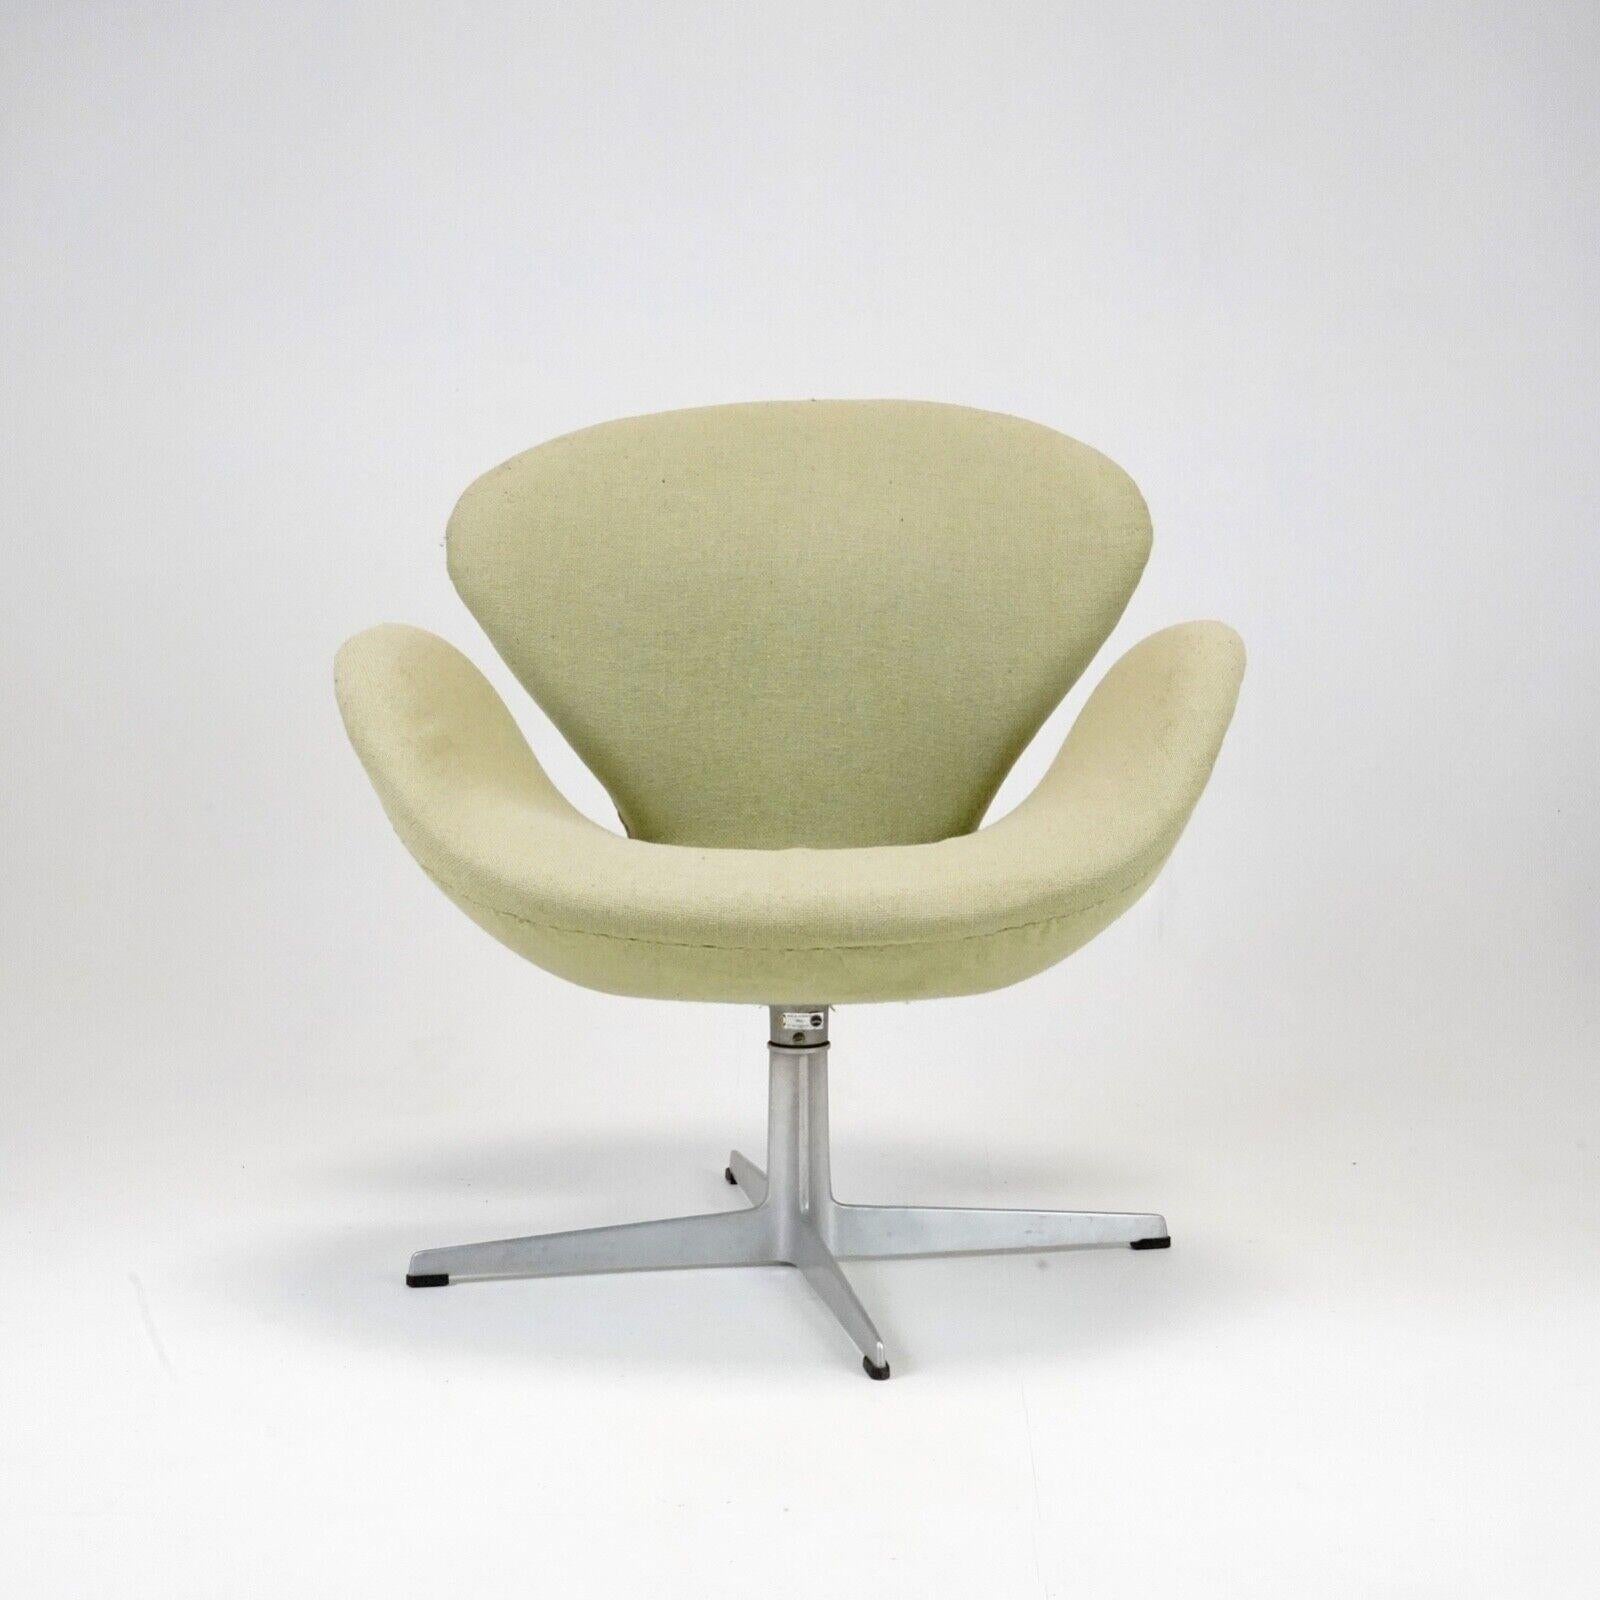 An early edition, Arne Jacobsen Swan chair produced by Fritz Hansen.
The chair has its original label that dates to 1966.
Original green natural fibre fabric that has ever so slightly faded and looks great for it. 
Spins well and in good